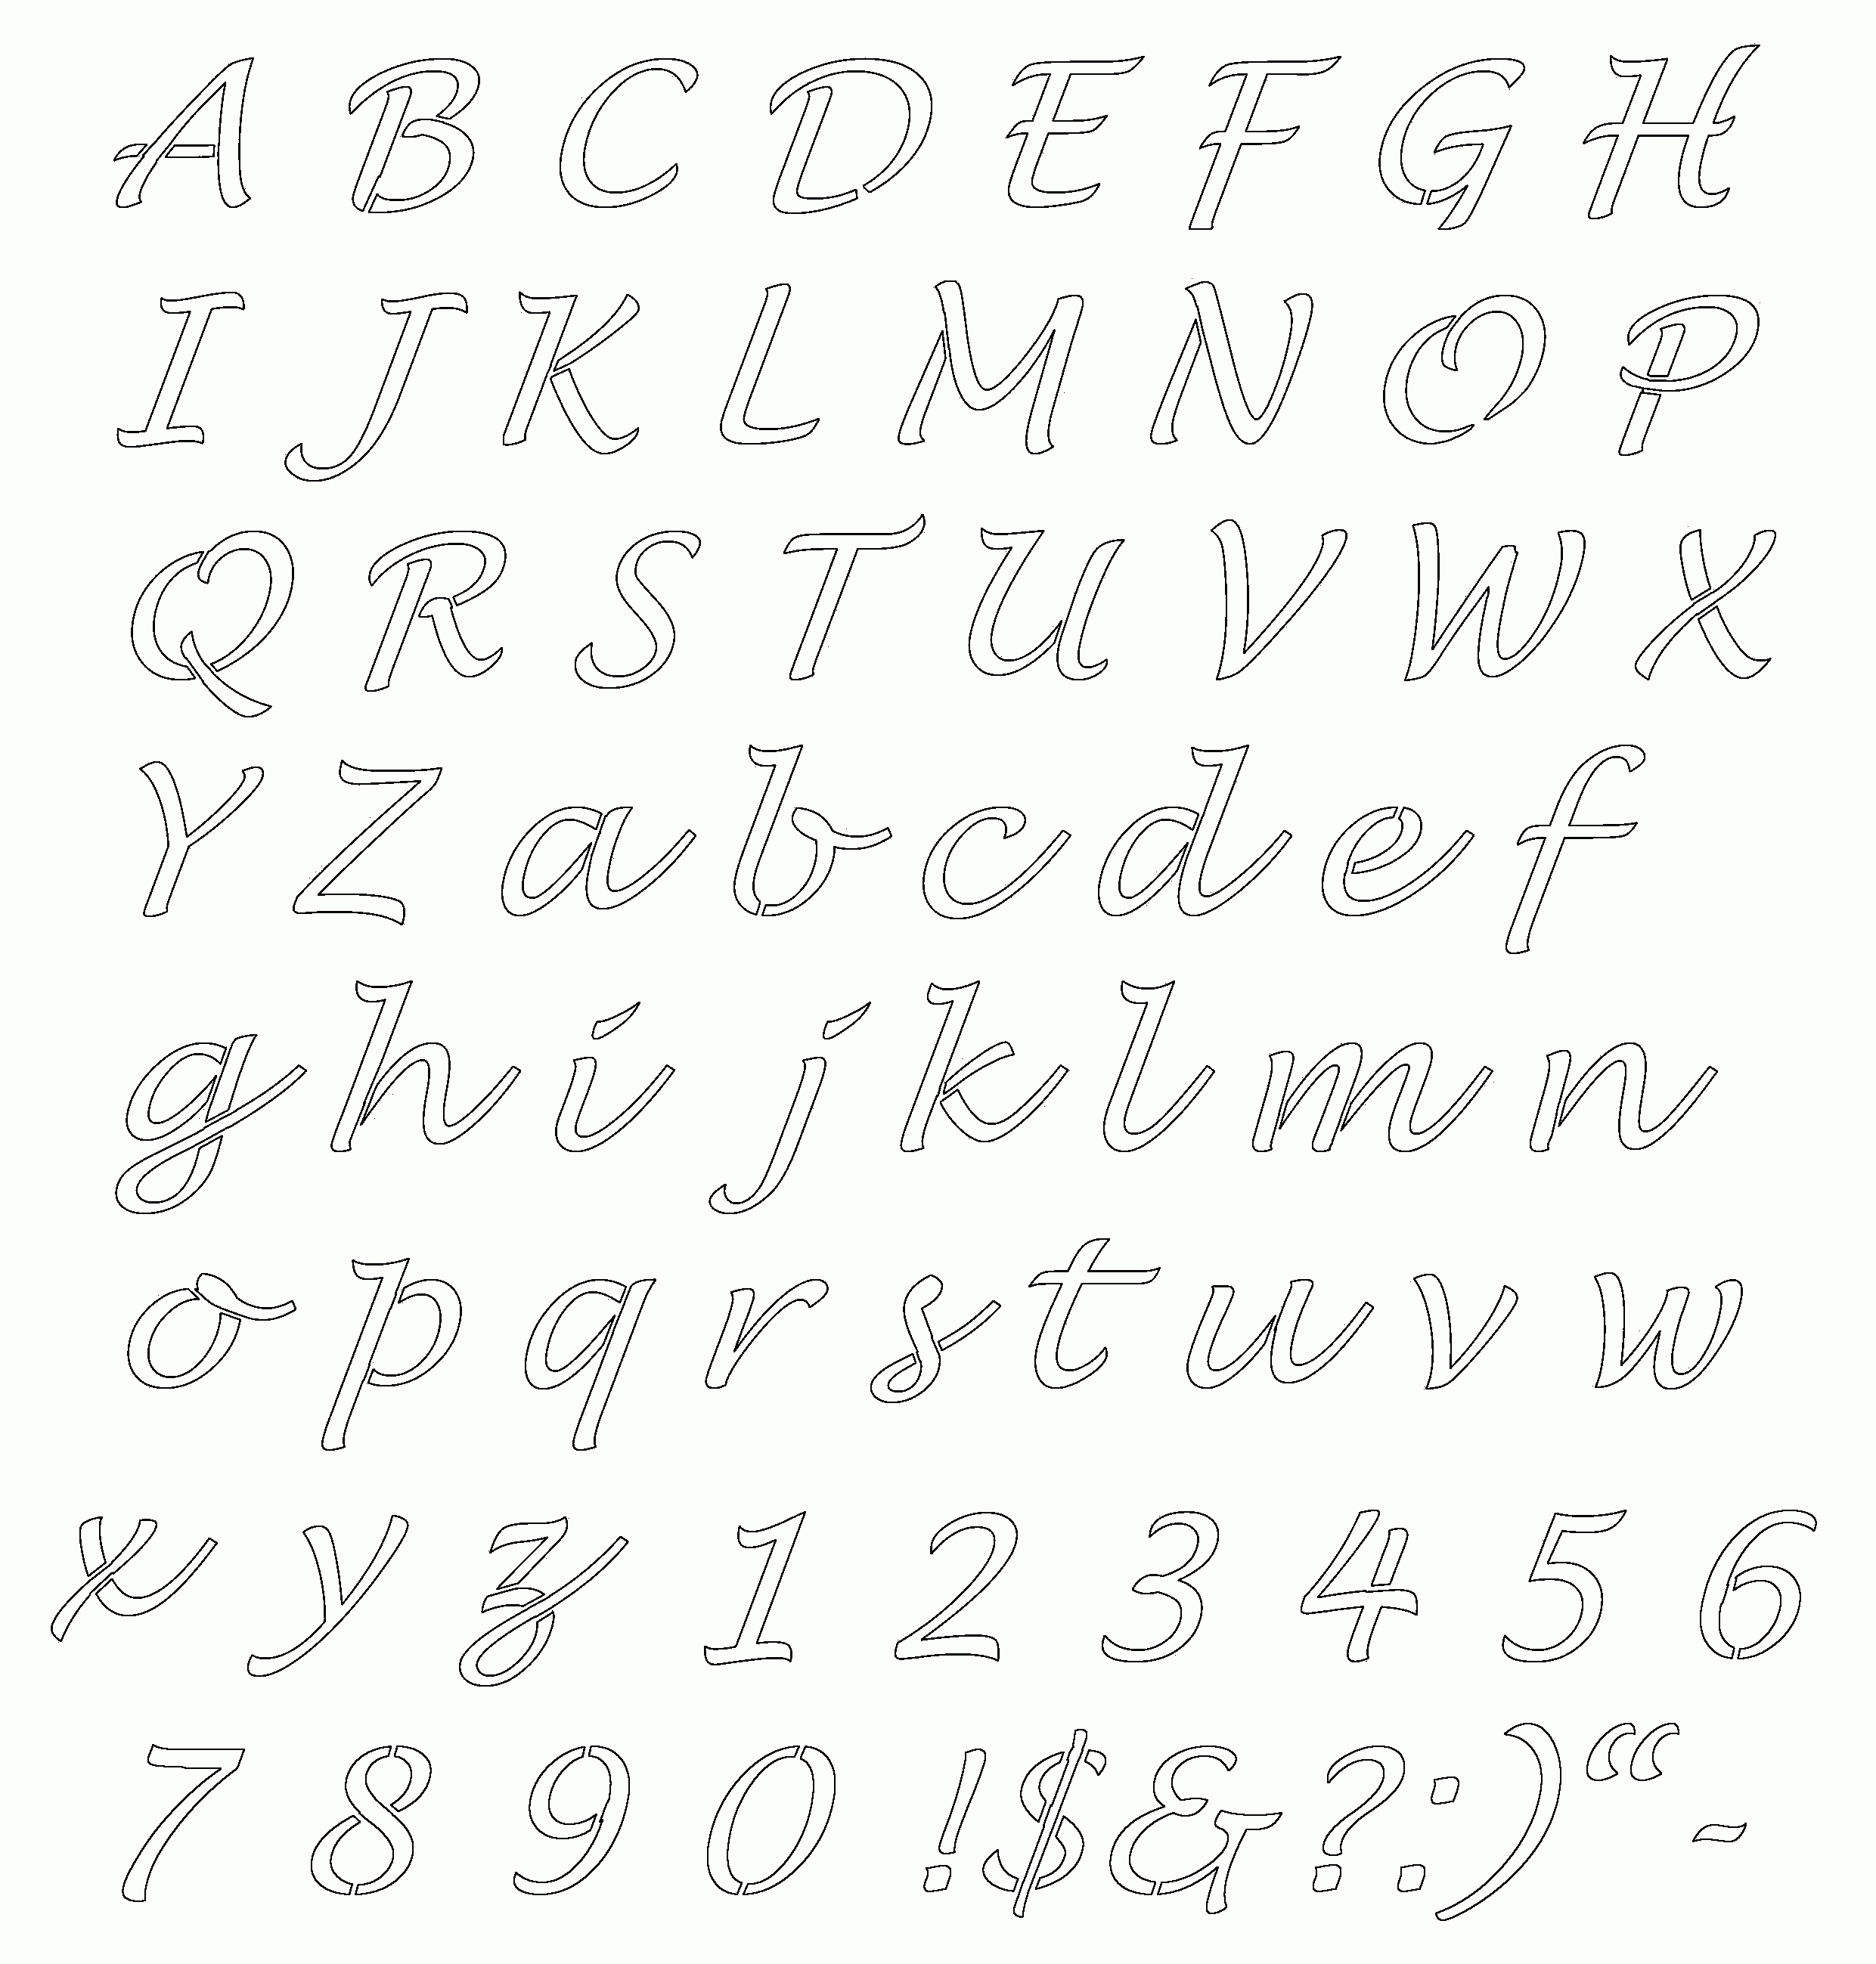 Free Online Alphabet Templates | Stencils Free Printable Alphabetaug - Free Printable Alphabet Stencils To Cut Out